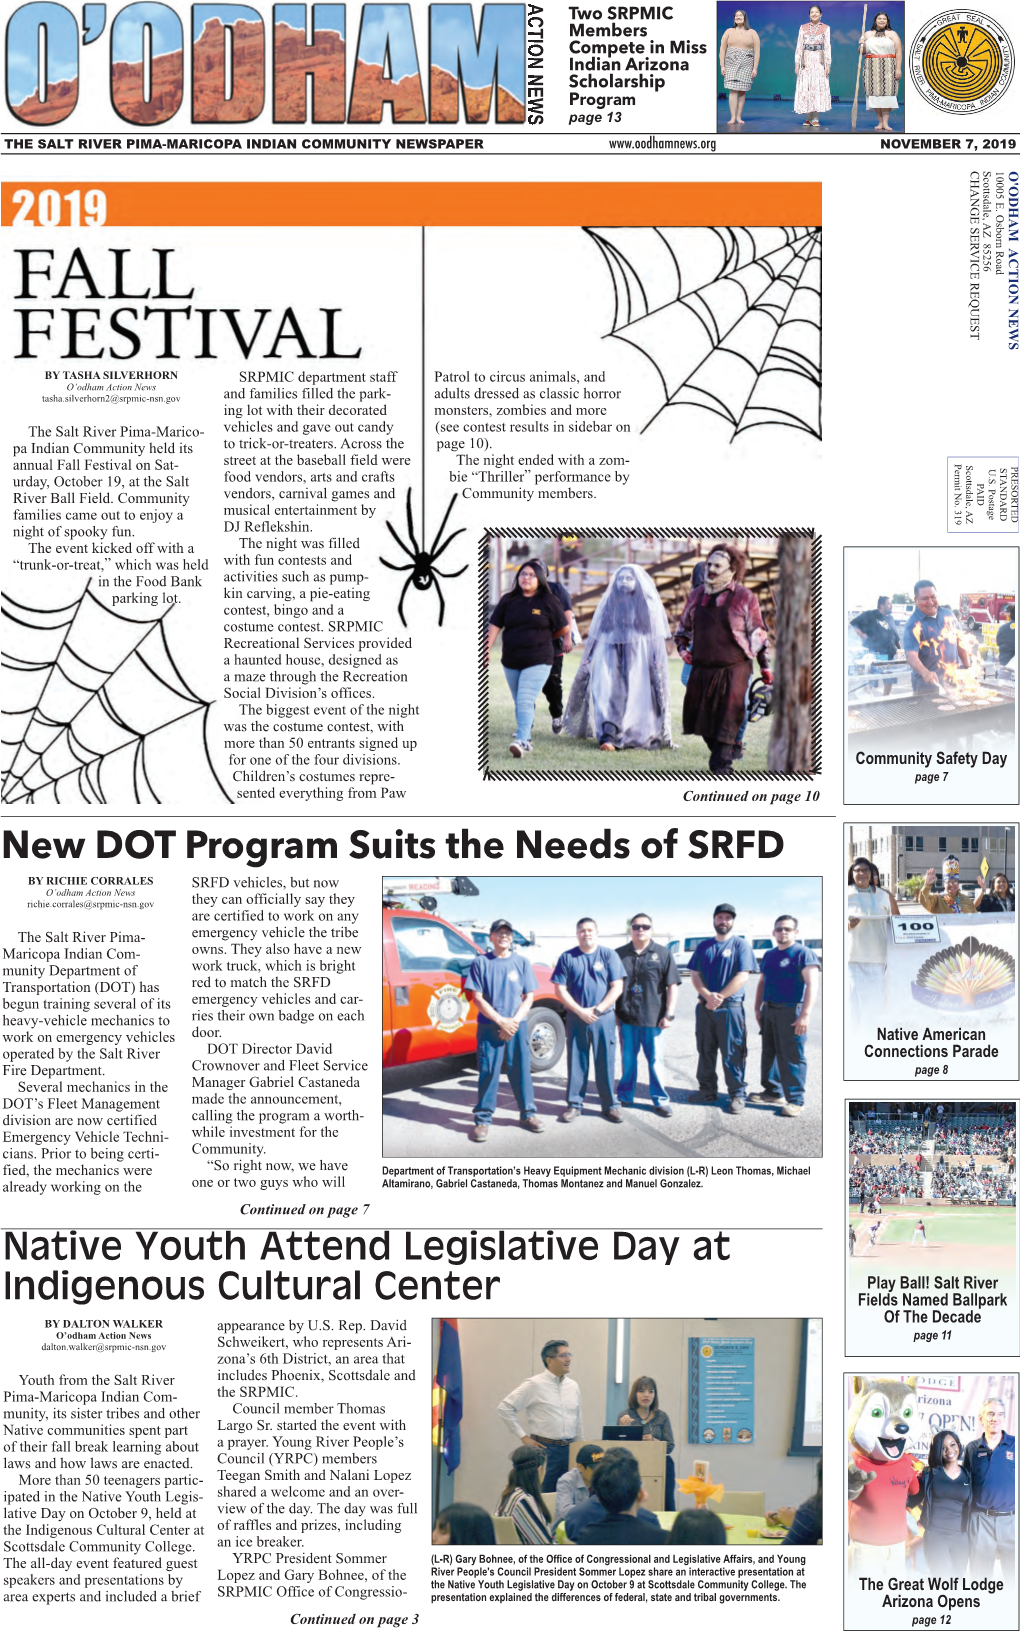 Native Youth Attend Legislative Day at Indigenous Cultural Center